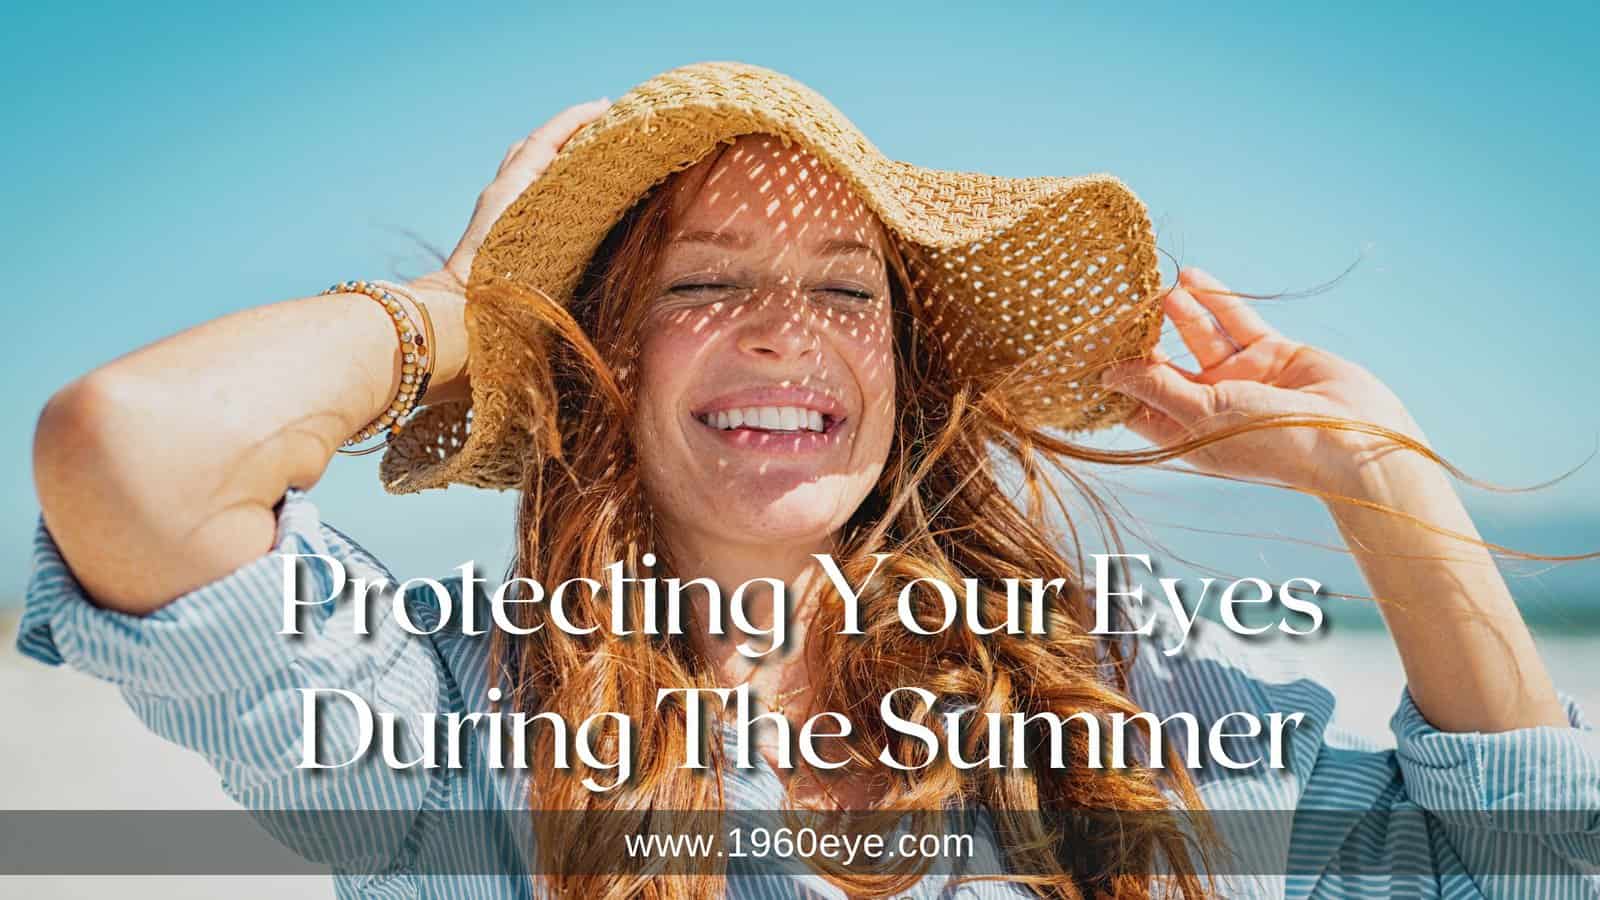 Protecting Your Eyes During The Summer